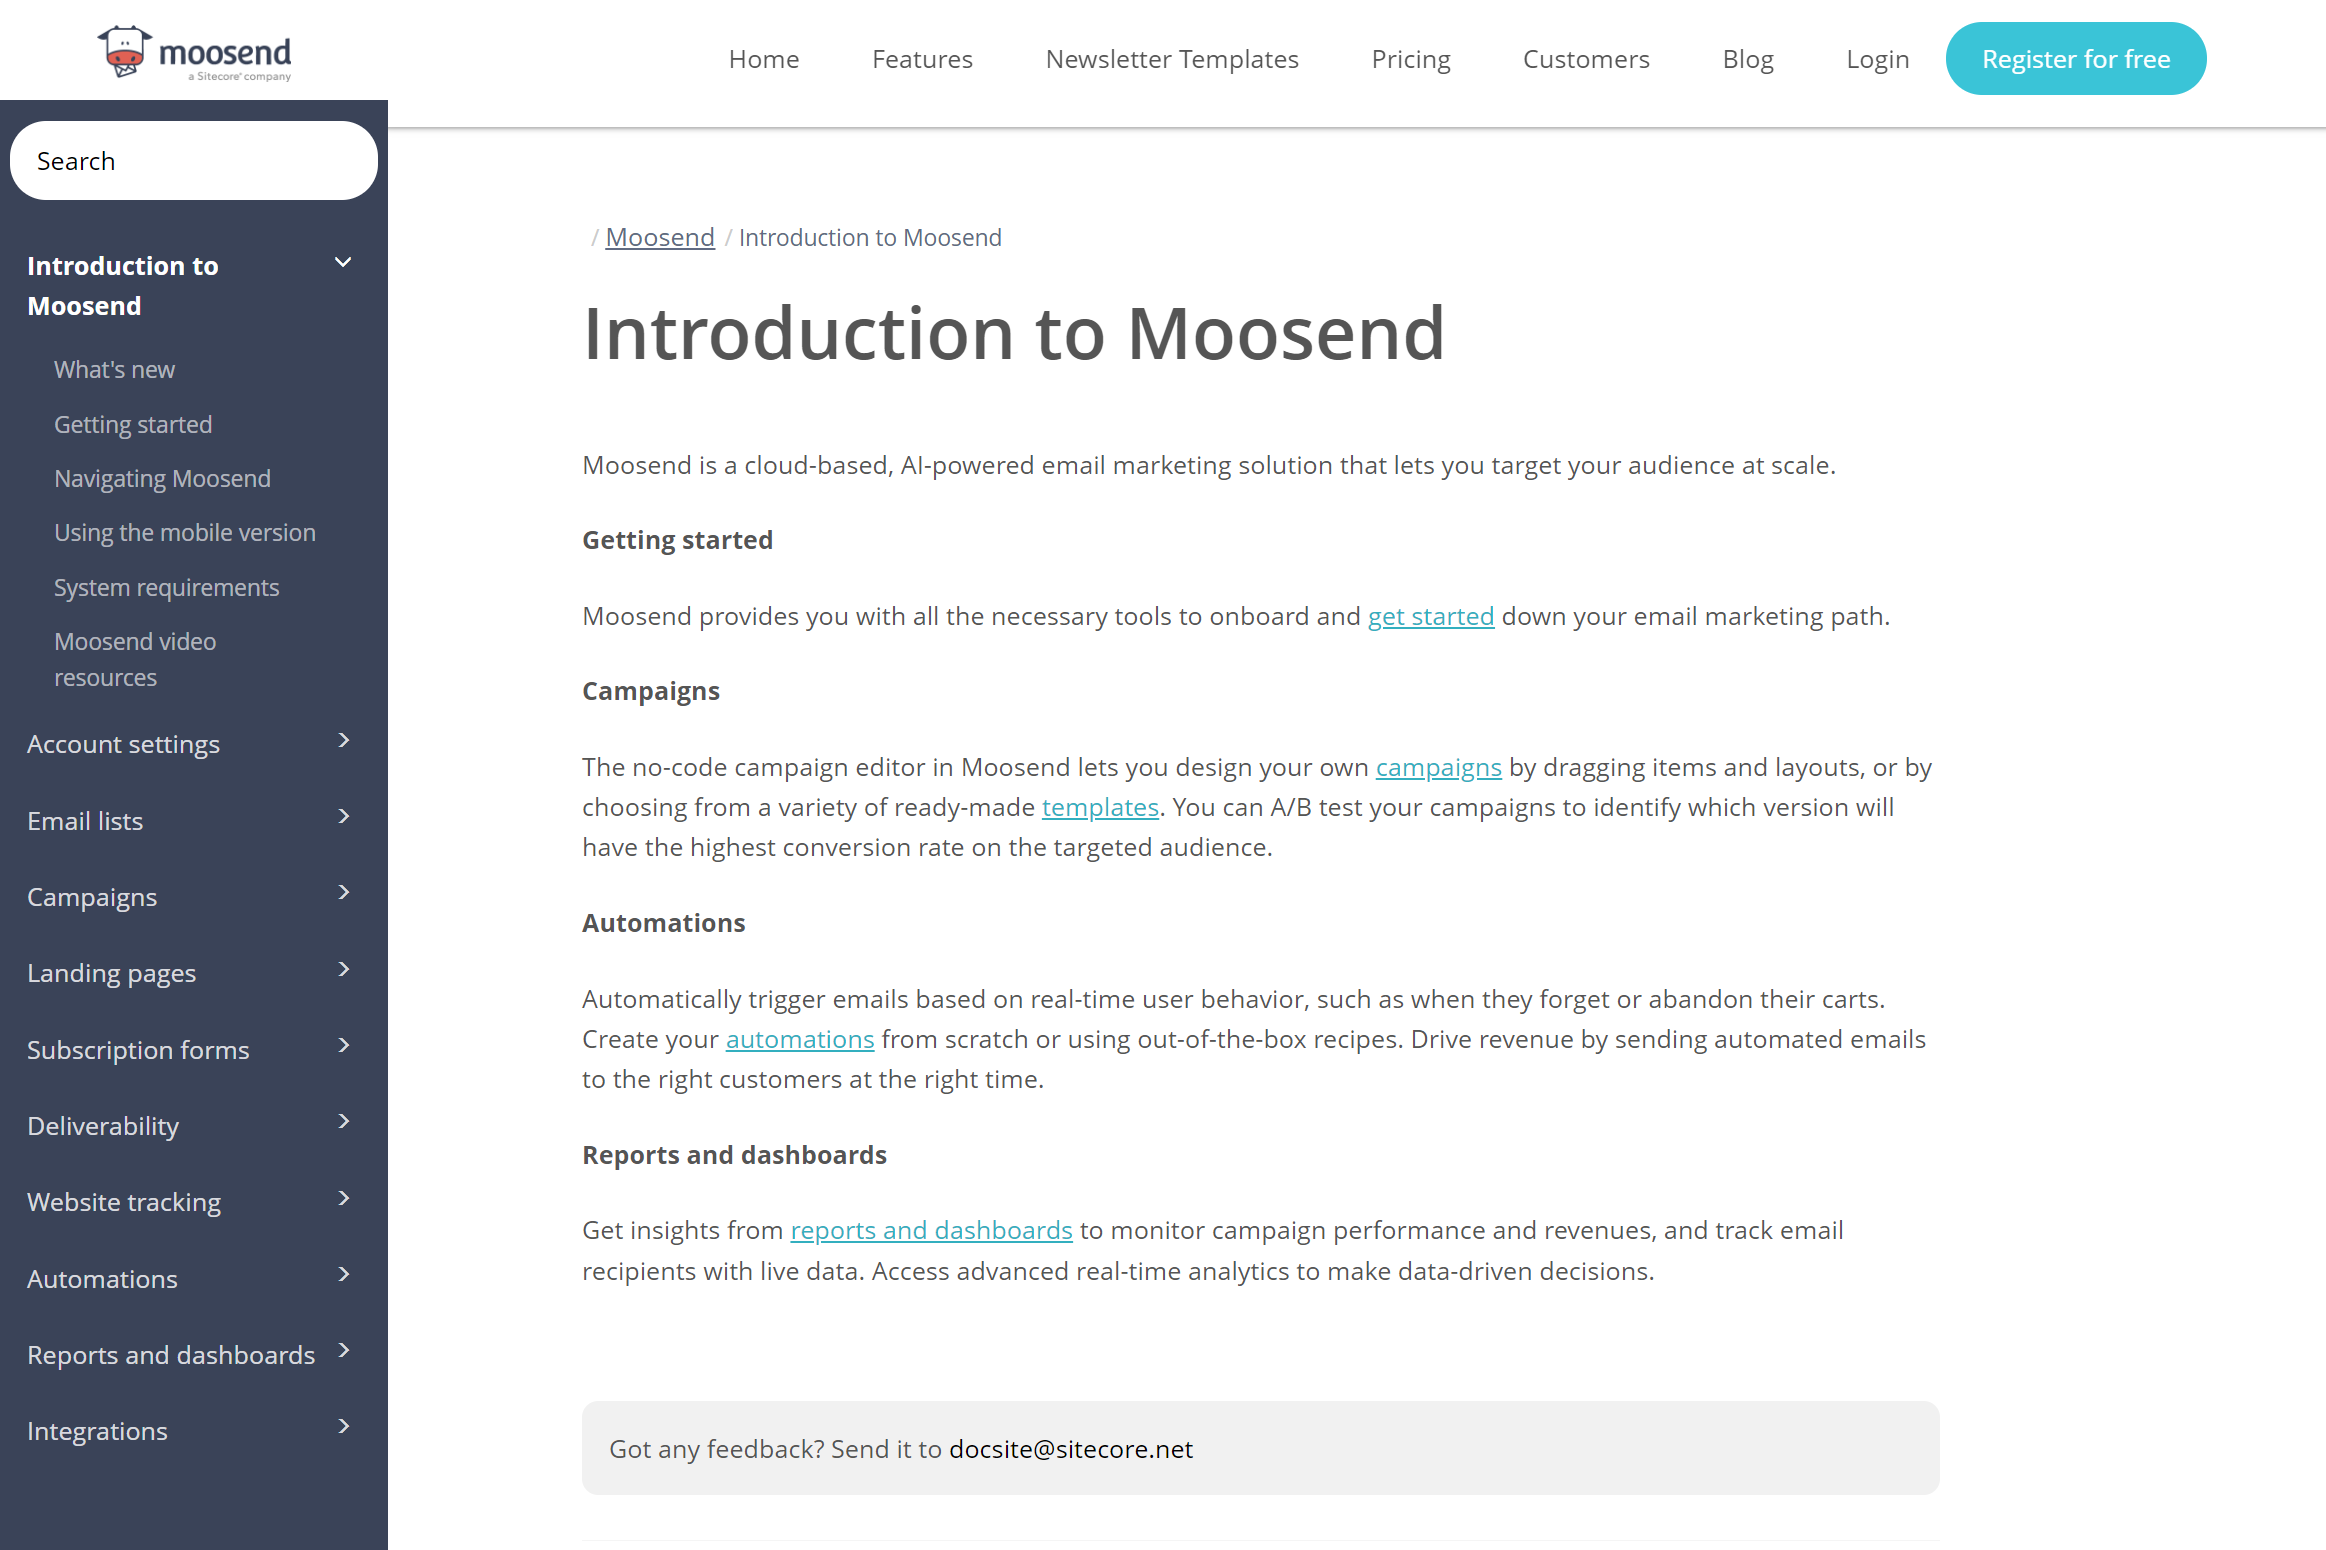 The new Moosend user documentation site